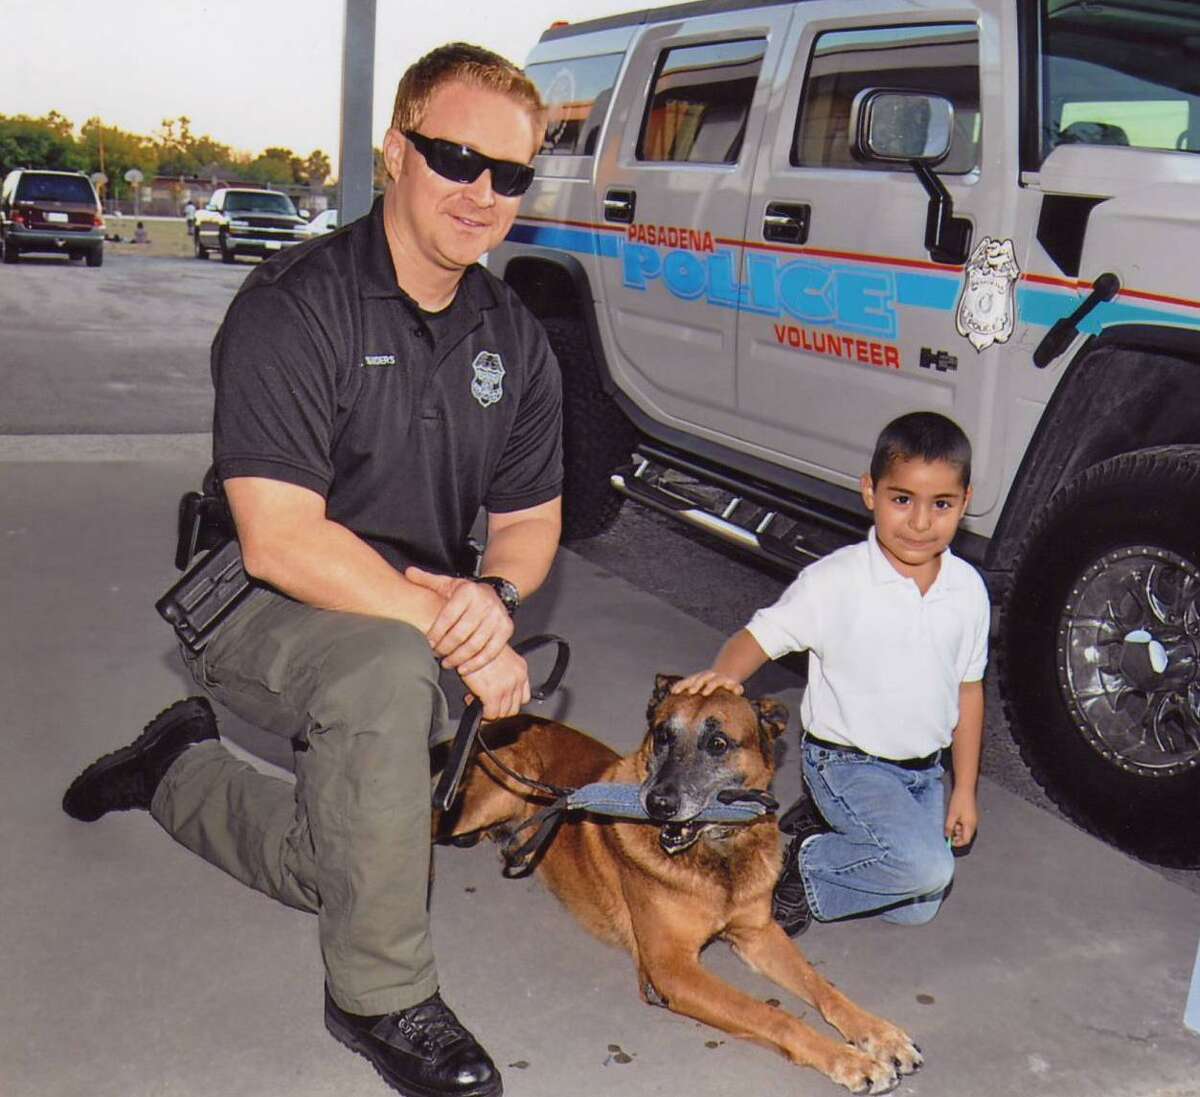 National Night Out is a long-standing annual tradition for law enforcement and communities to get together and build partnerships. A boy gets acquainted with a Pasadena police officer and his dog at a previous event. 